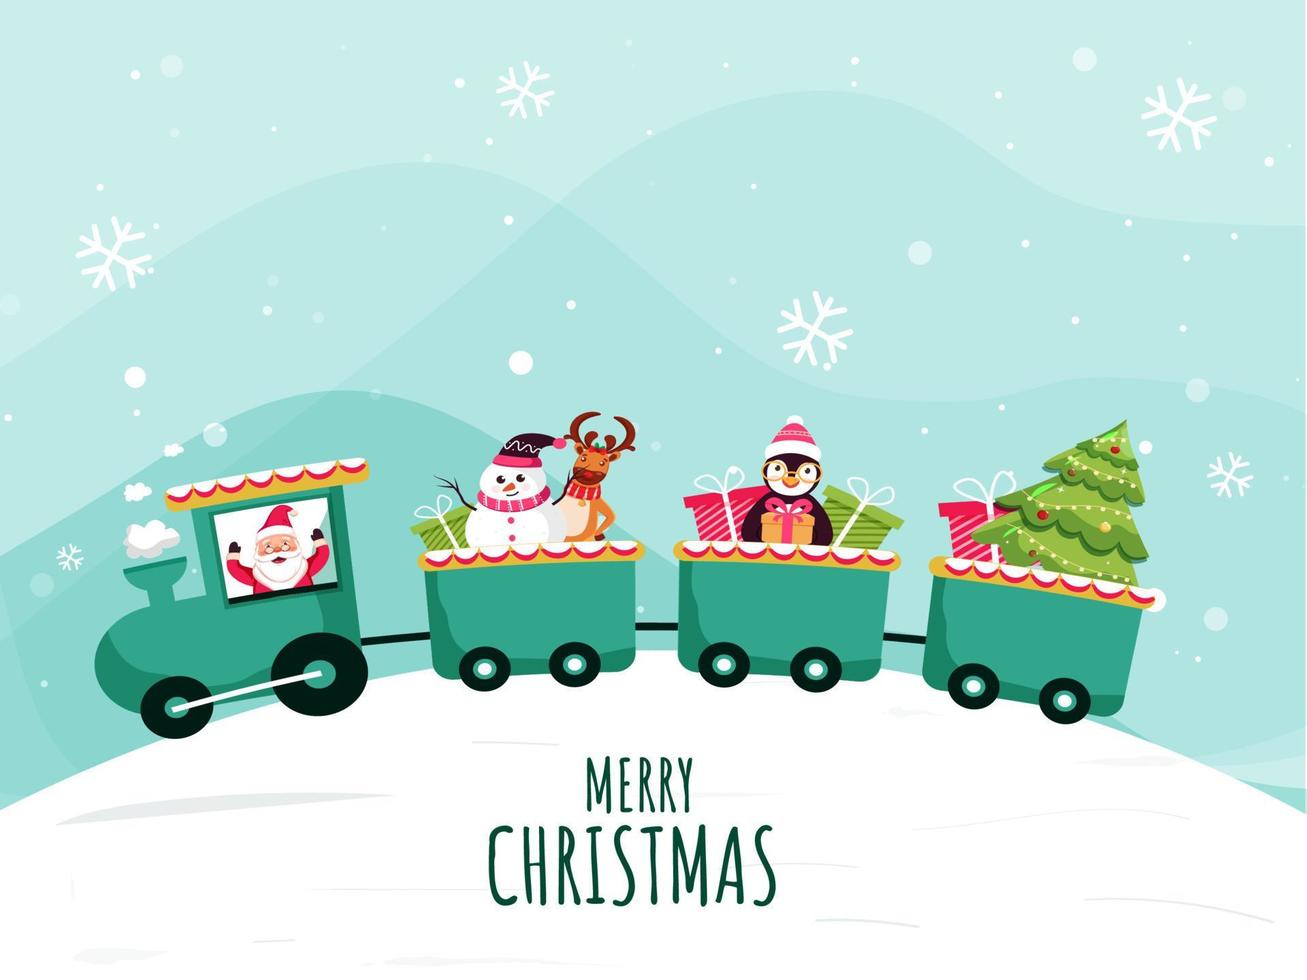 Merry Christmas Celebration Train on Light Turquoise and Snowy Background. vector